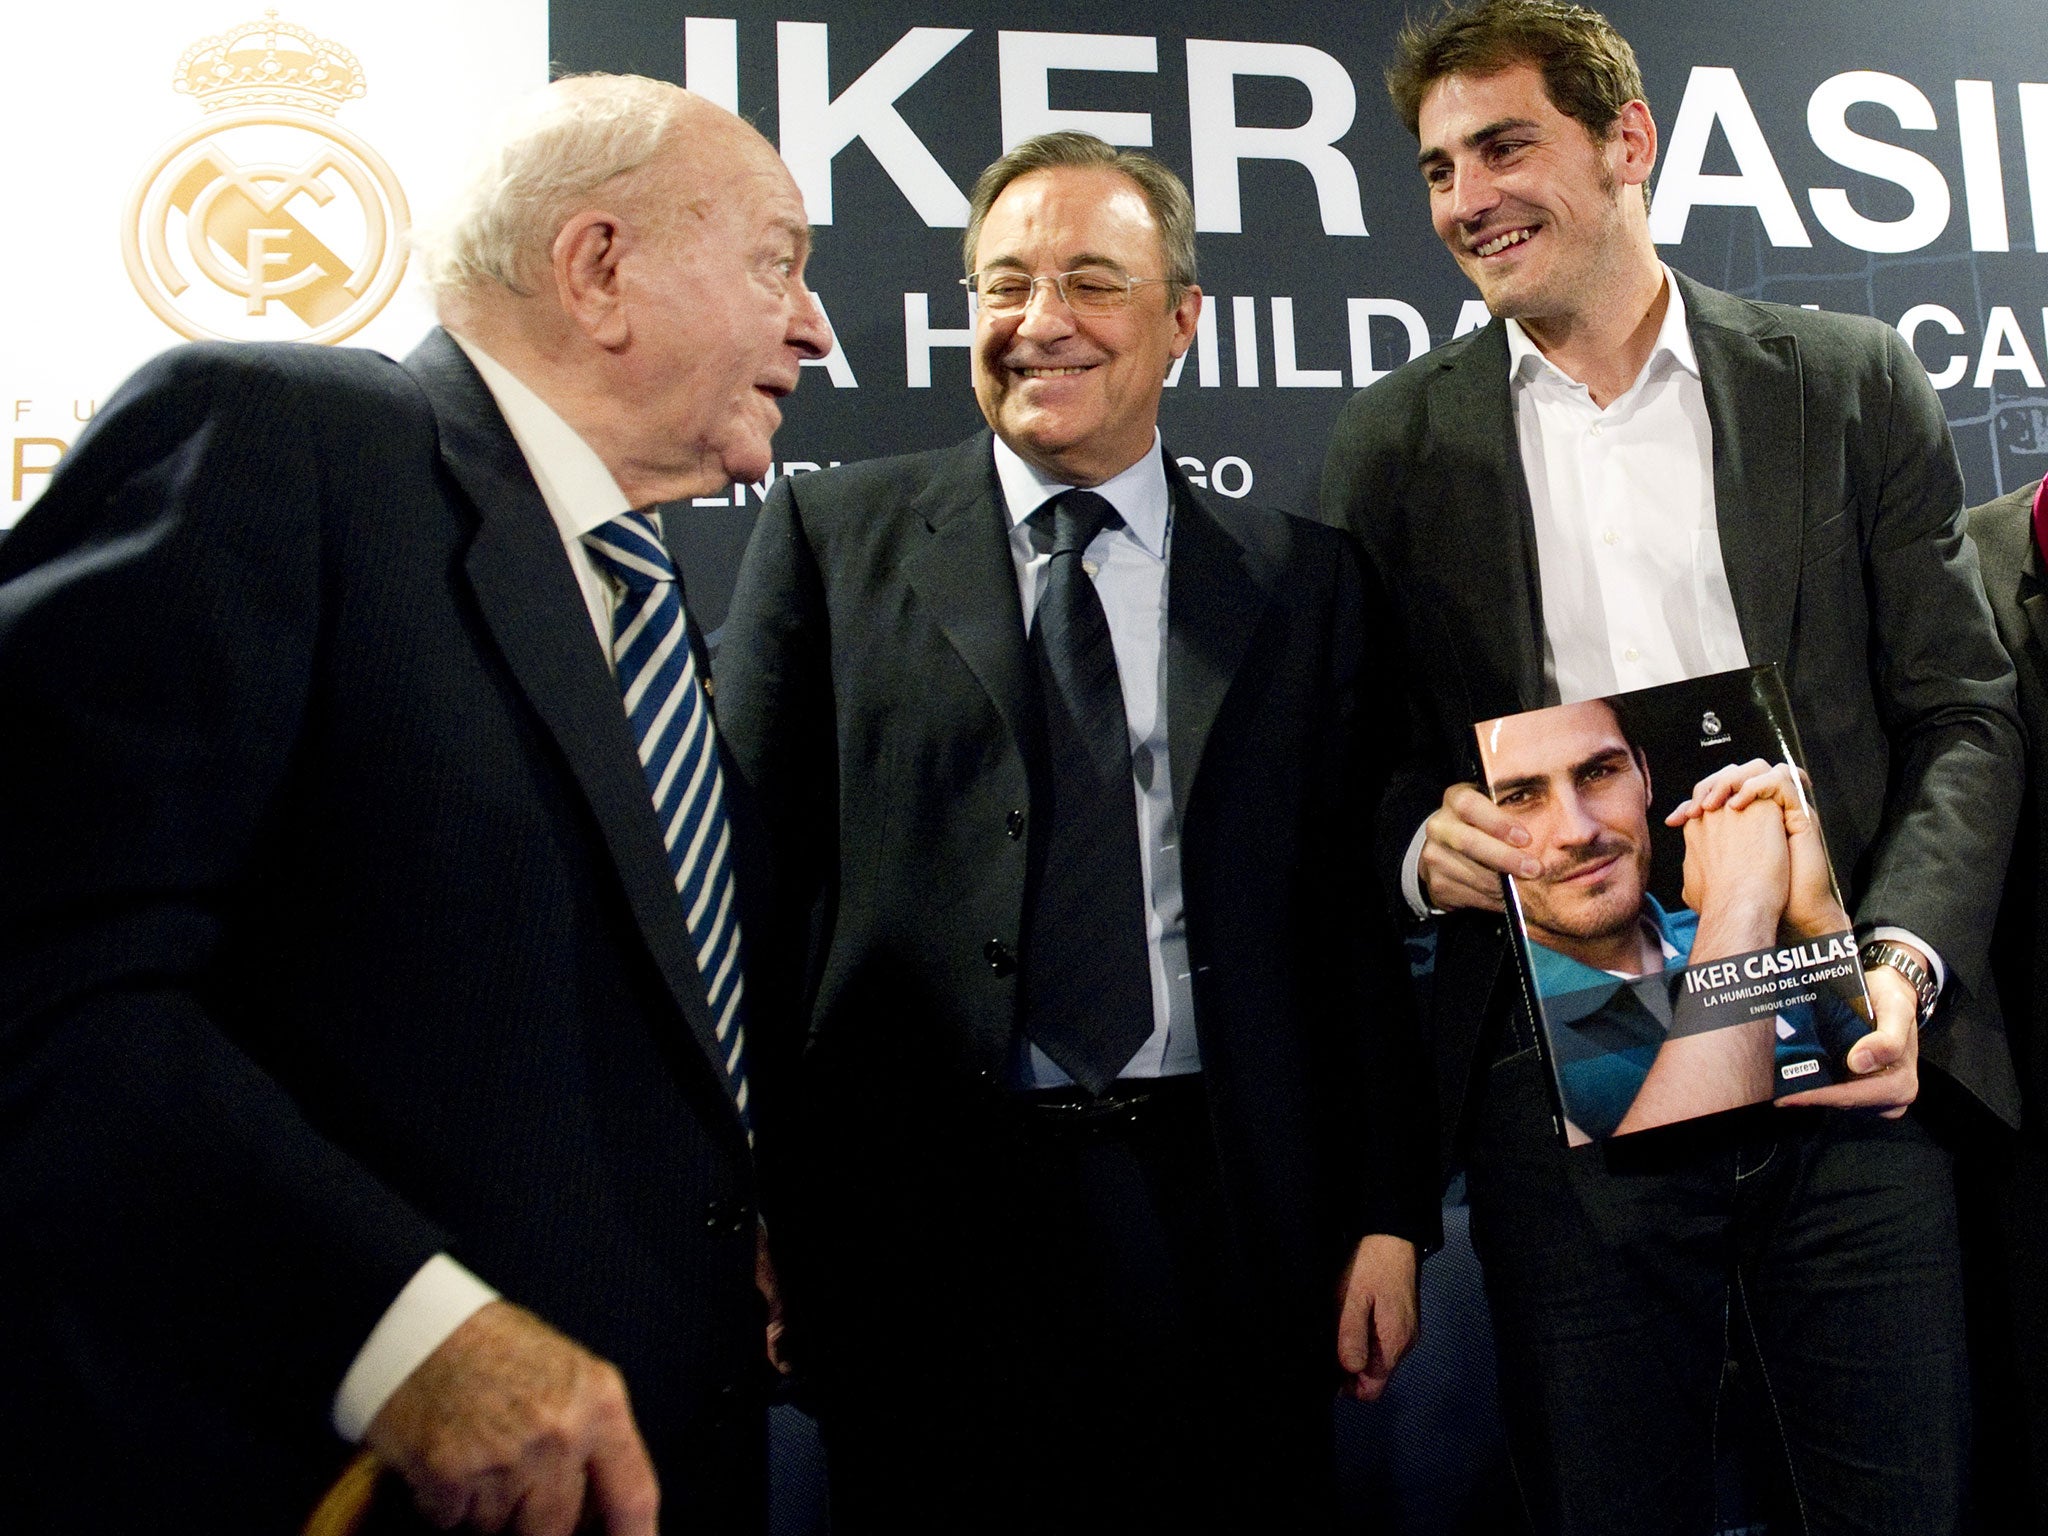 Real Madrid's goalkeeper and captain Iker Casillas (R) poses with his biography 'La humildad del campeon' (The humility of the champion) flanked by President of Real Madrid football club Florentino Perez and President of Honour of Real Madrid Alfredo Di S